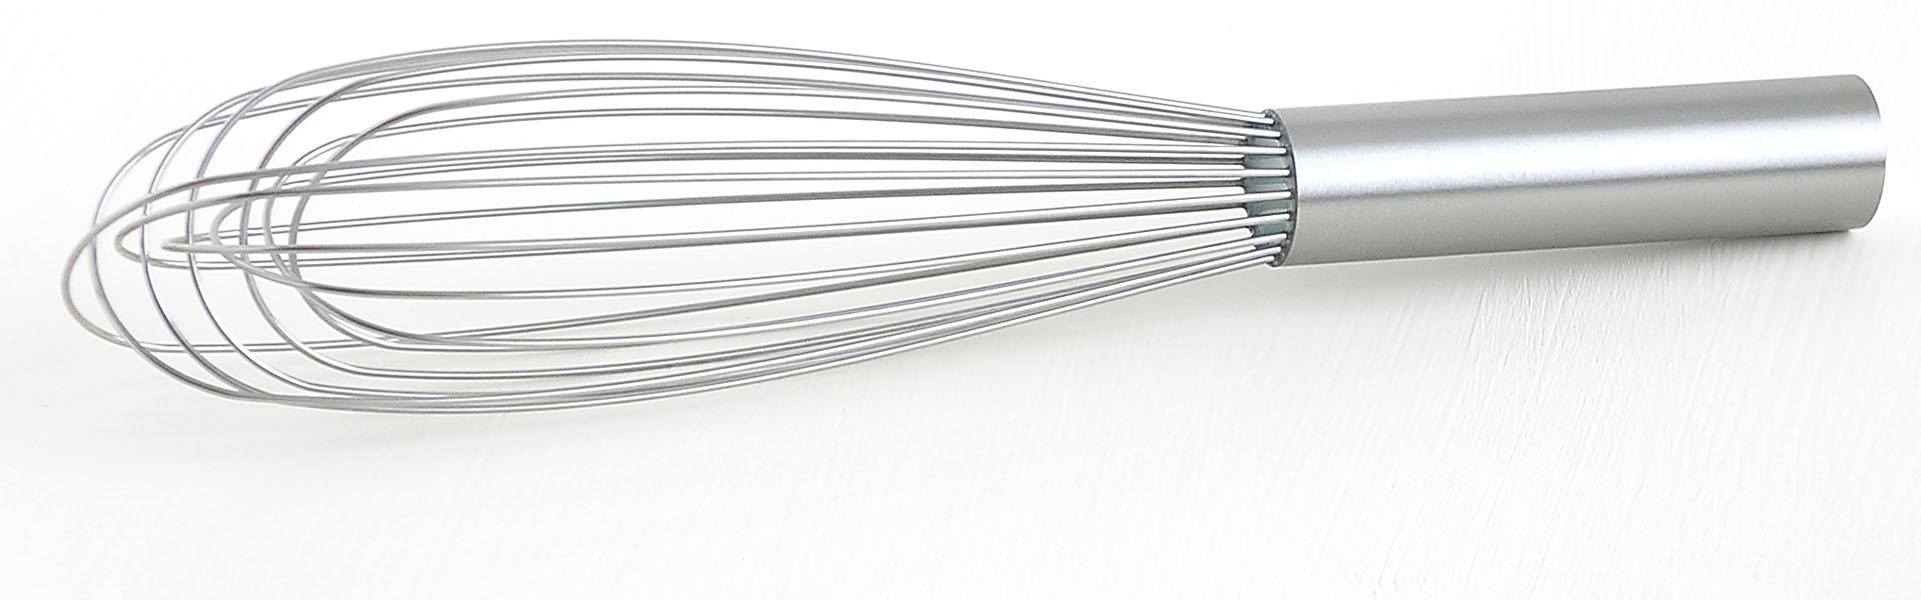 whisk 10" french stainless steel handle